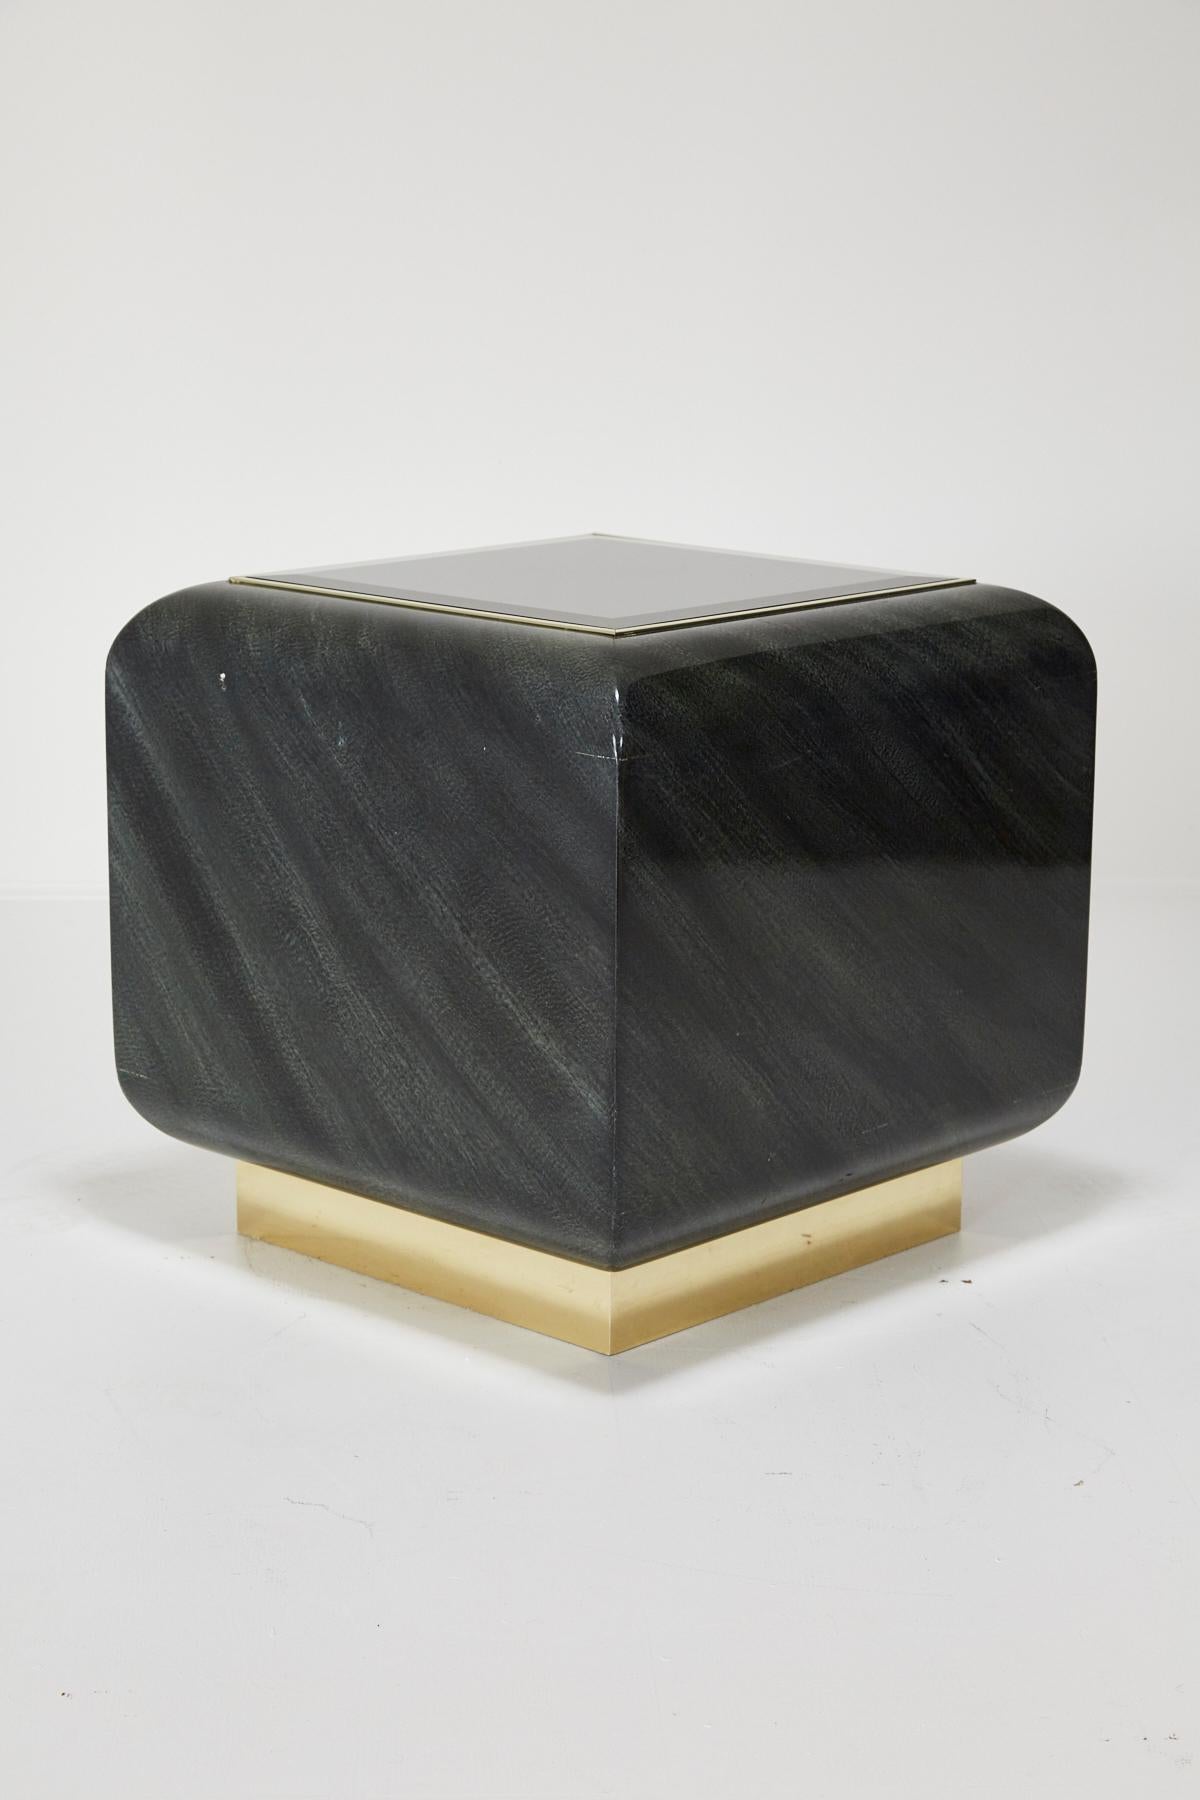 Beautiful oversized cube shaped side or end table with soft rounded edges with Postmodern styling. Brass toe kicks support a rounded cube body covered in patterned black on dark green laminate. Top centre with beveled black glass insert with brass